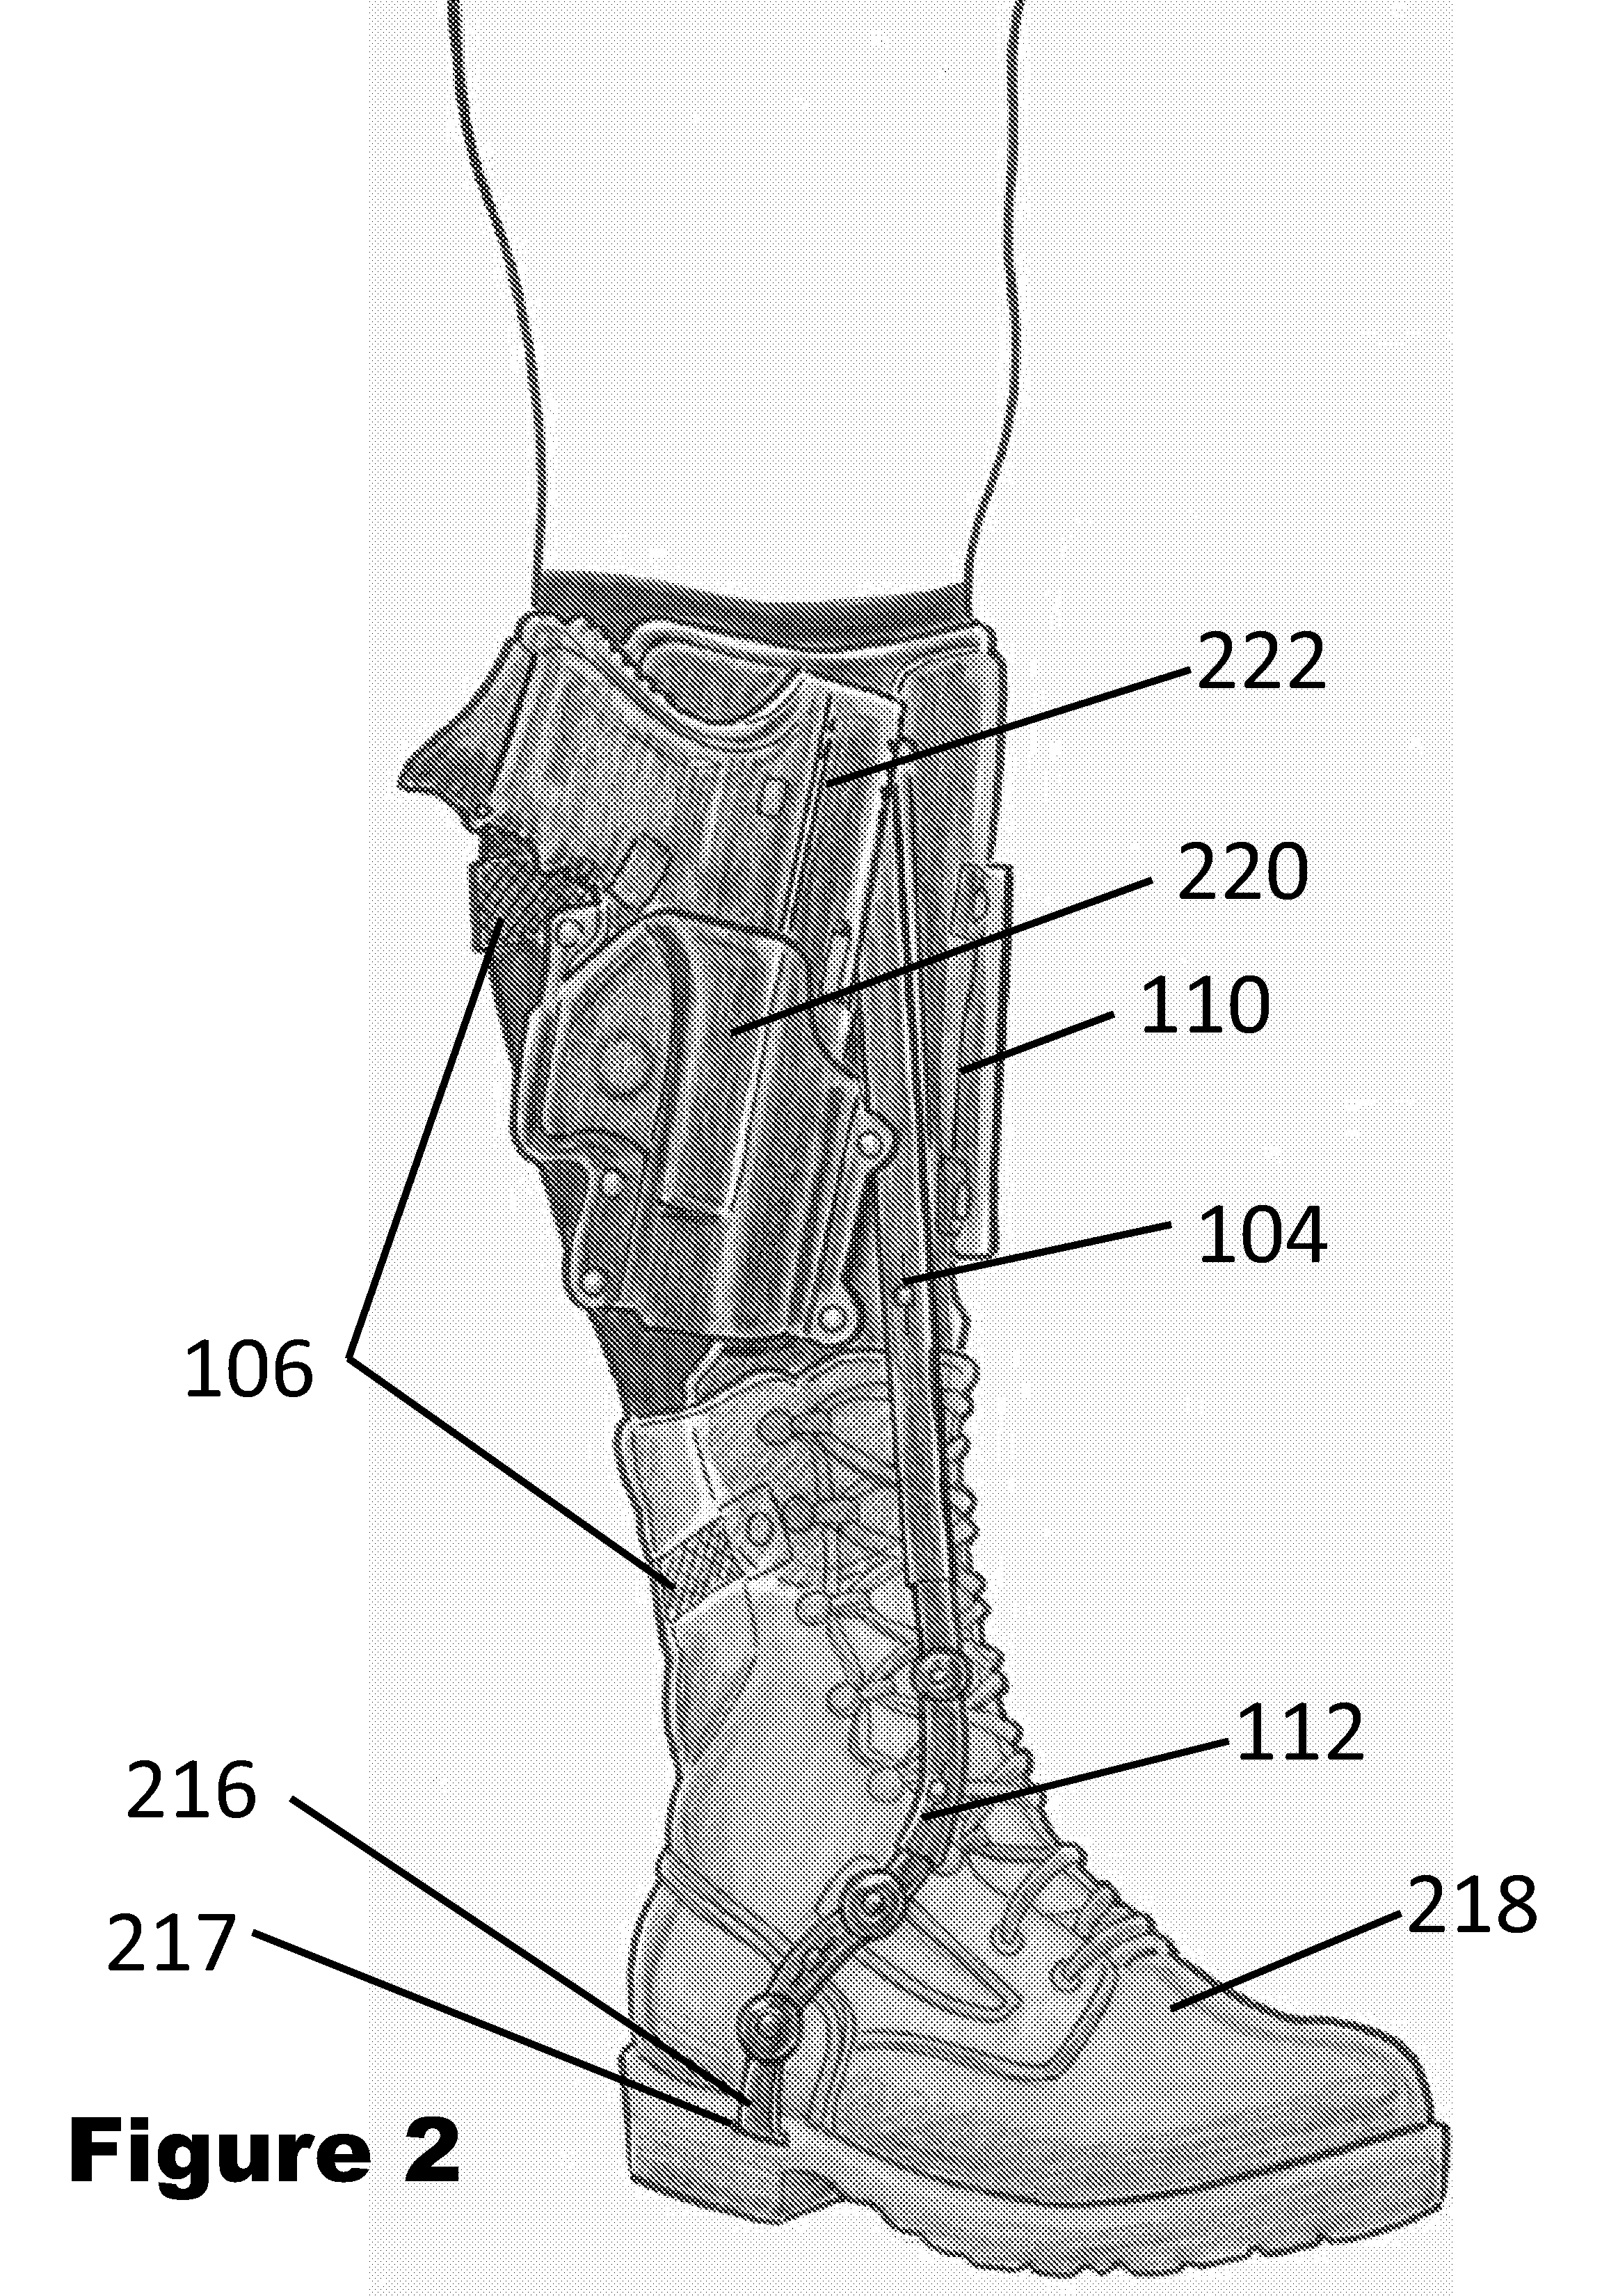 Ankle holster with foot orthosis and exoskeleton